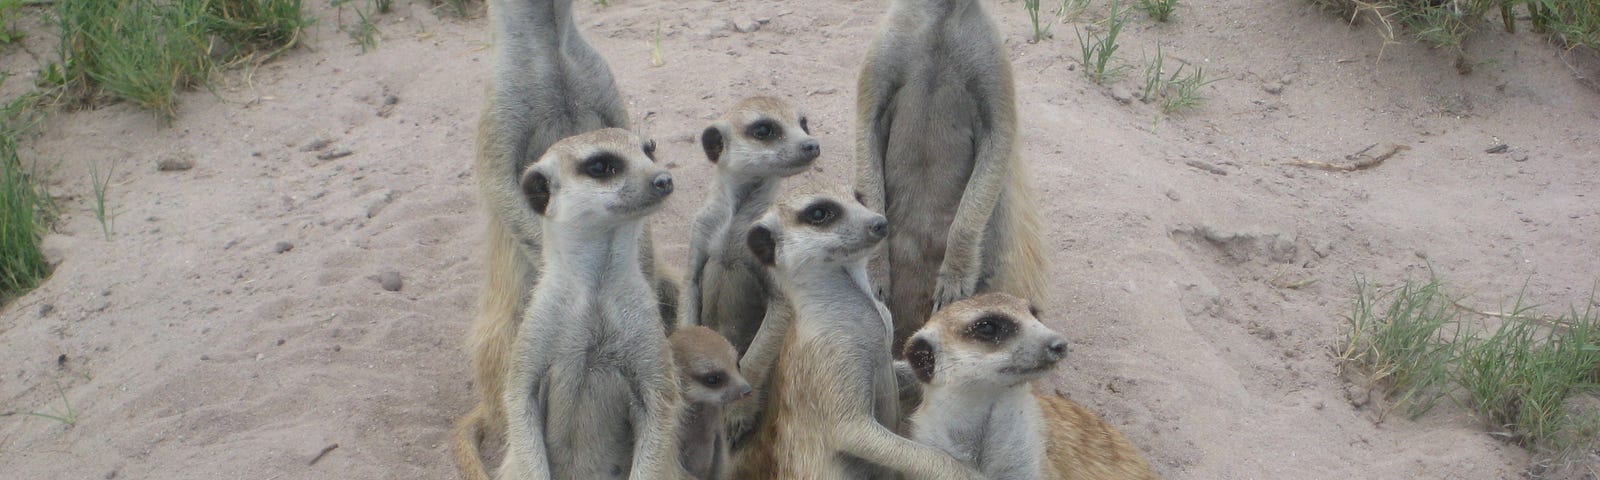 A group of eight meerkats in the desert looking up in search of birds of prey surrounded by short grass.